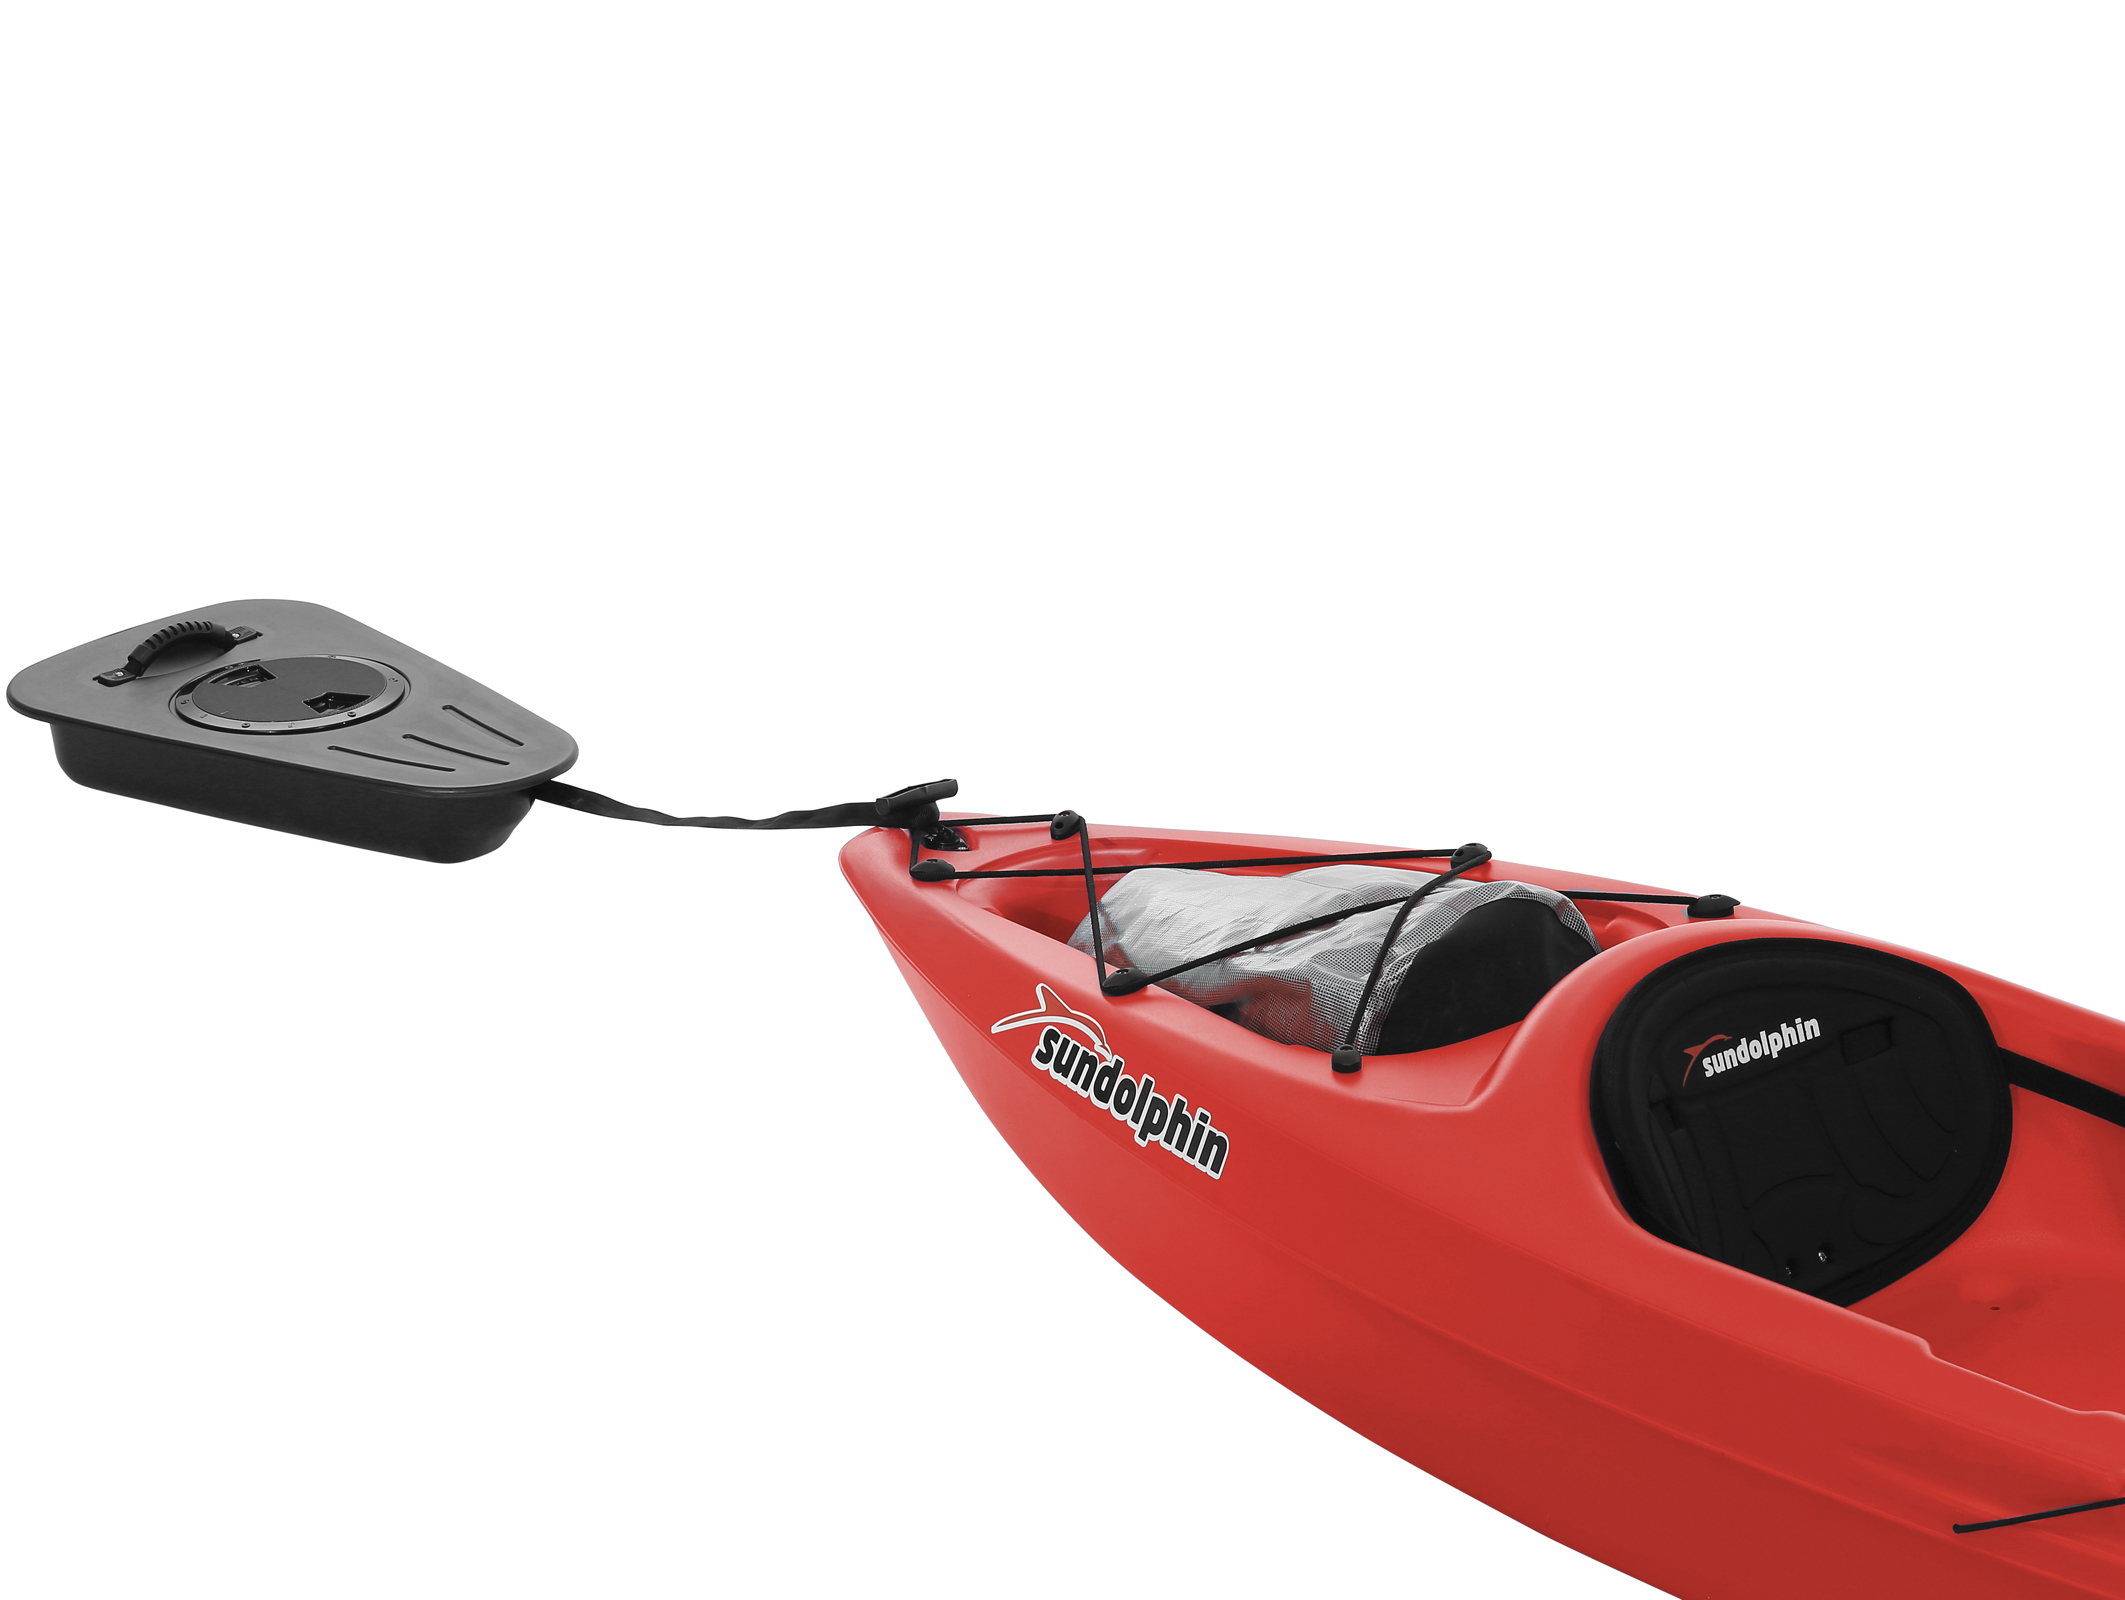 Sun Dolphin Bali 10' Sit-On Kayak Red, Paddle Included - image 3 of 4